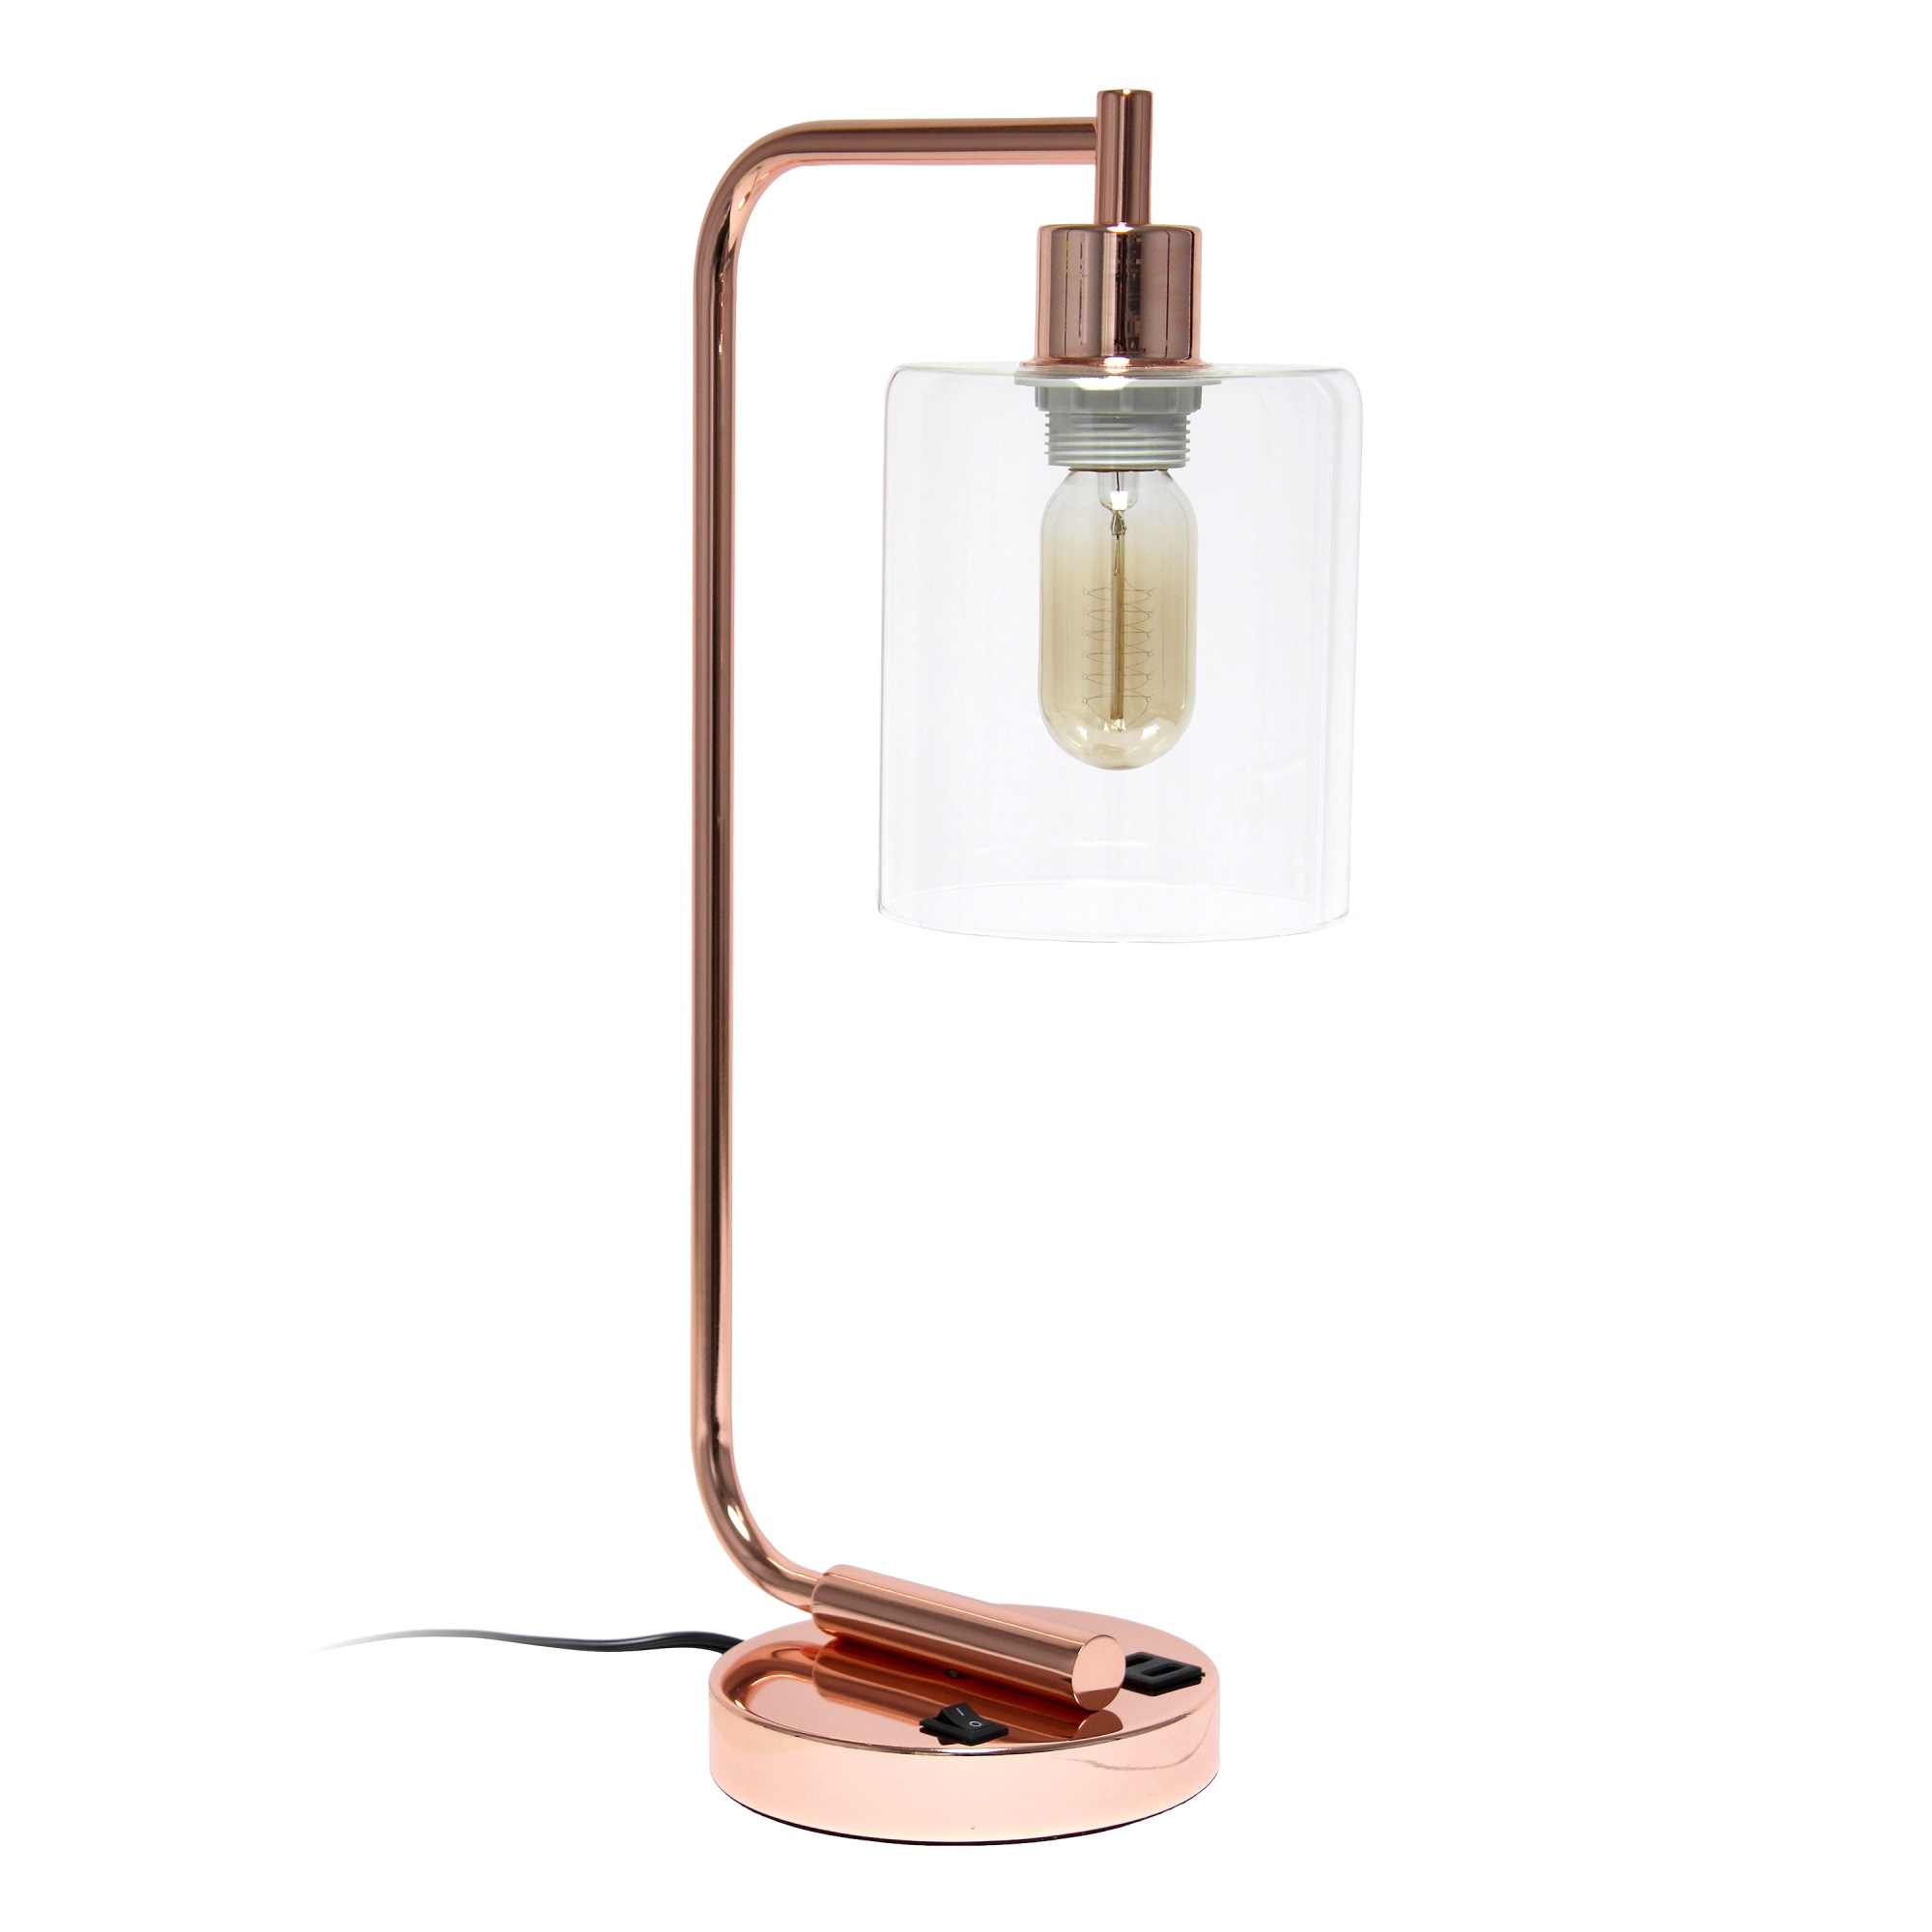 Lalia Home Modern Iron Desk Lamp with USB Port and Glass Shade, Rose Gold